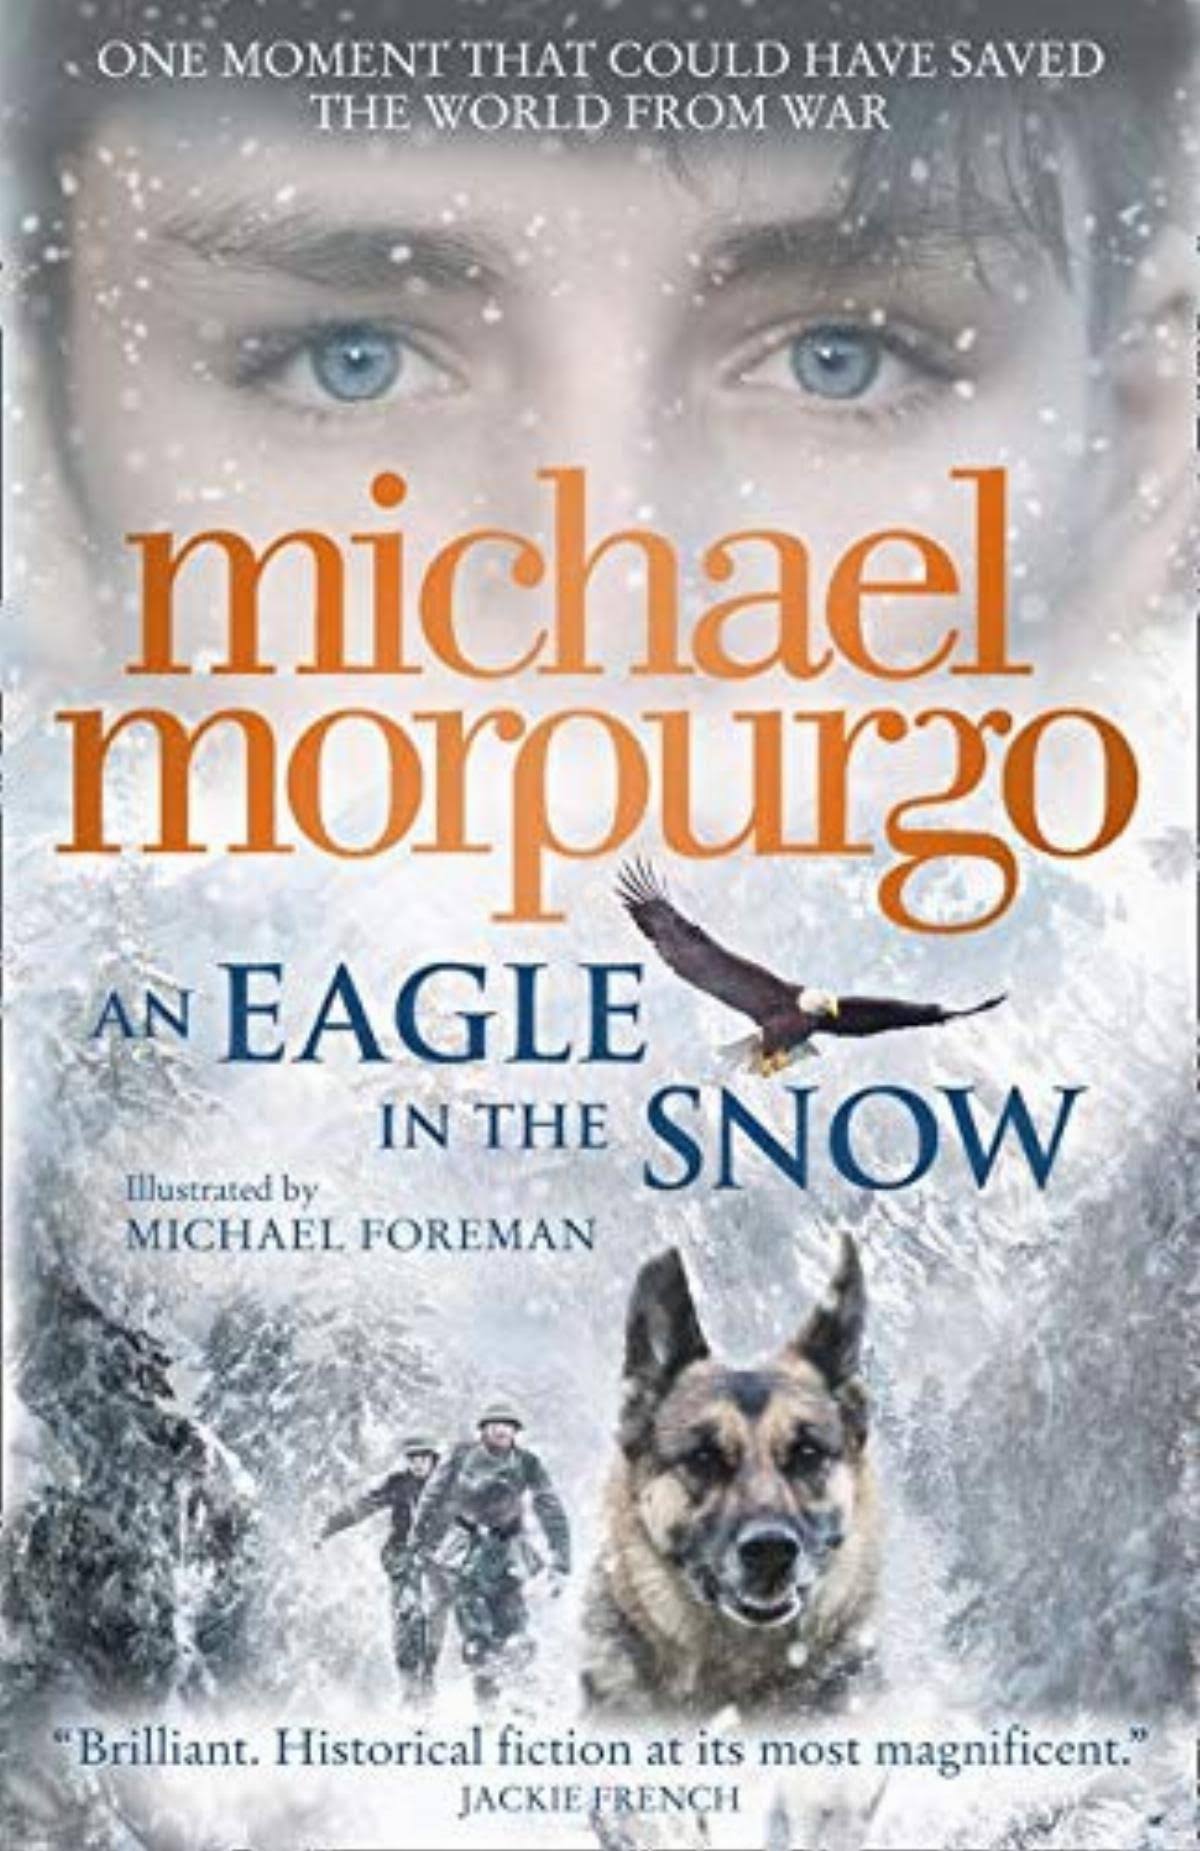 An Eagle in the Snow [Book]